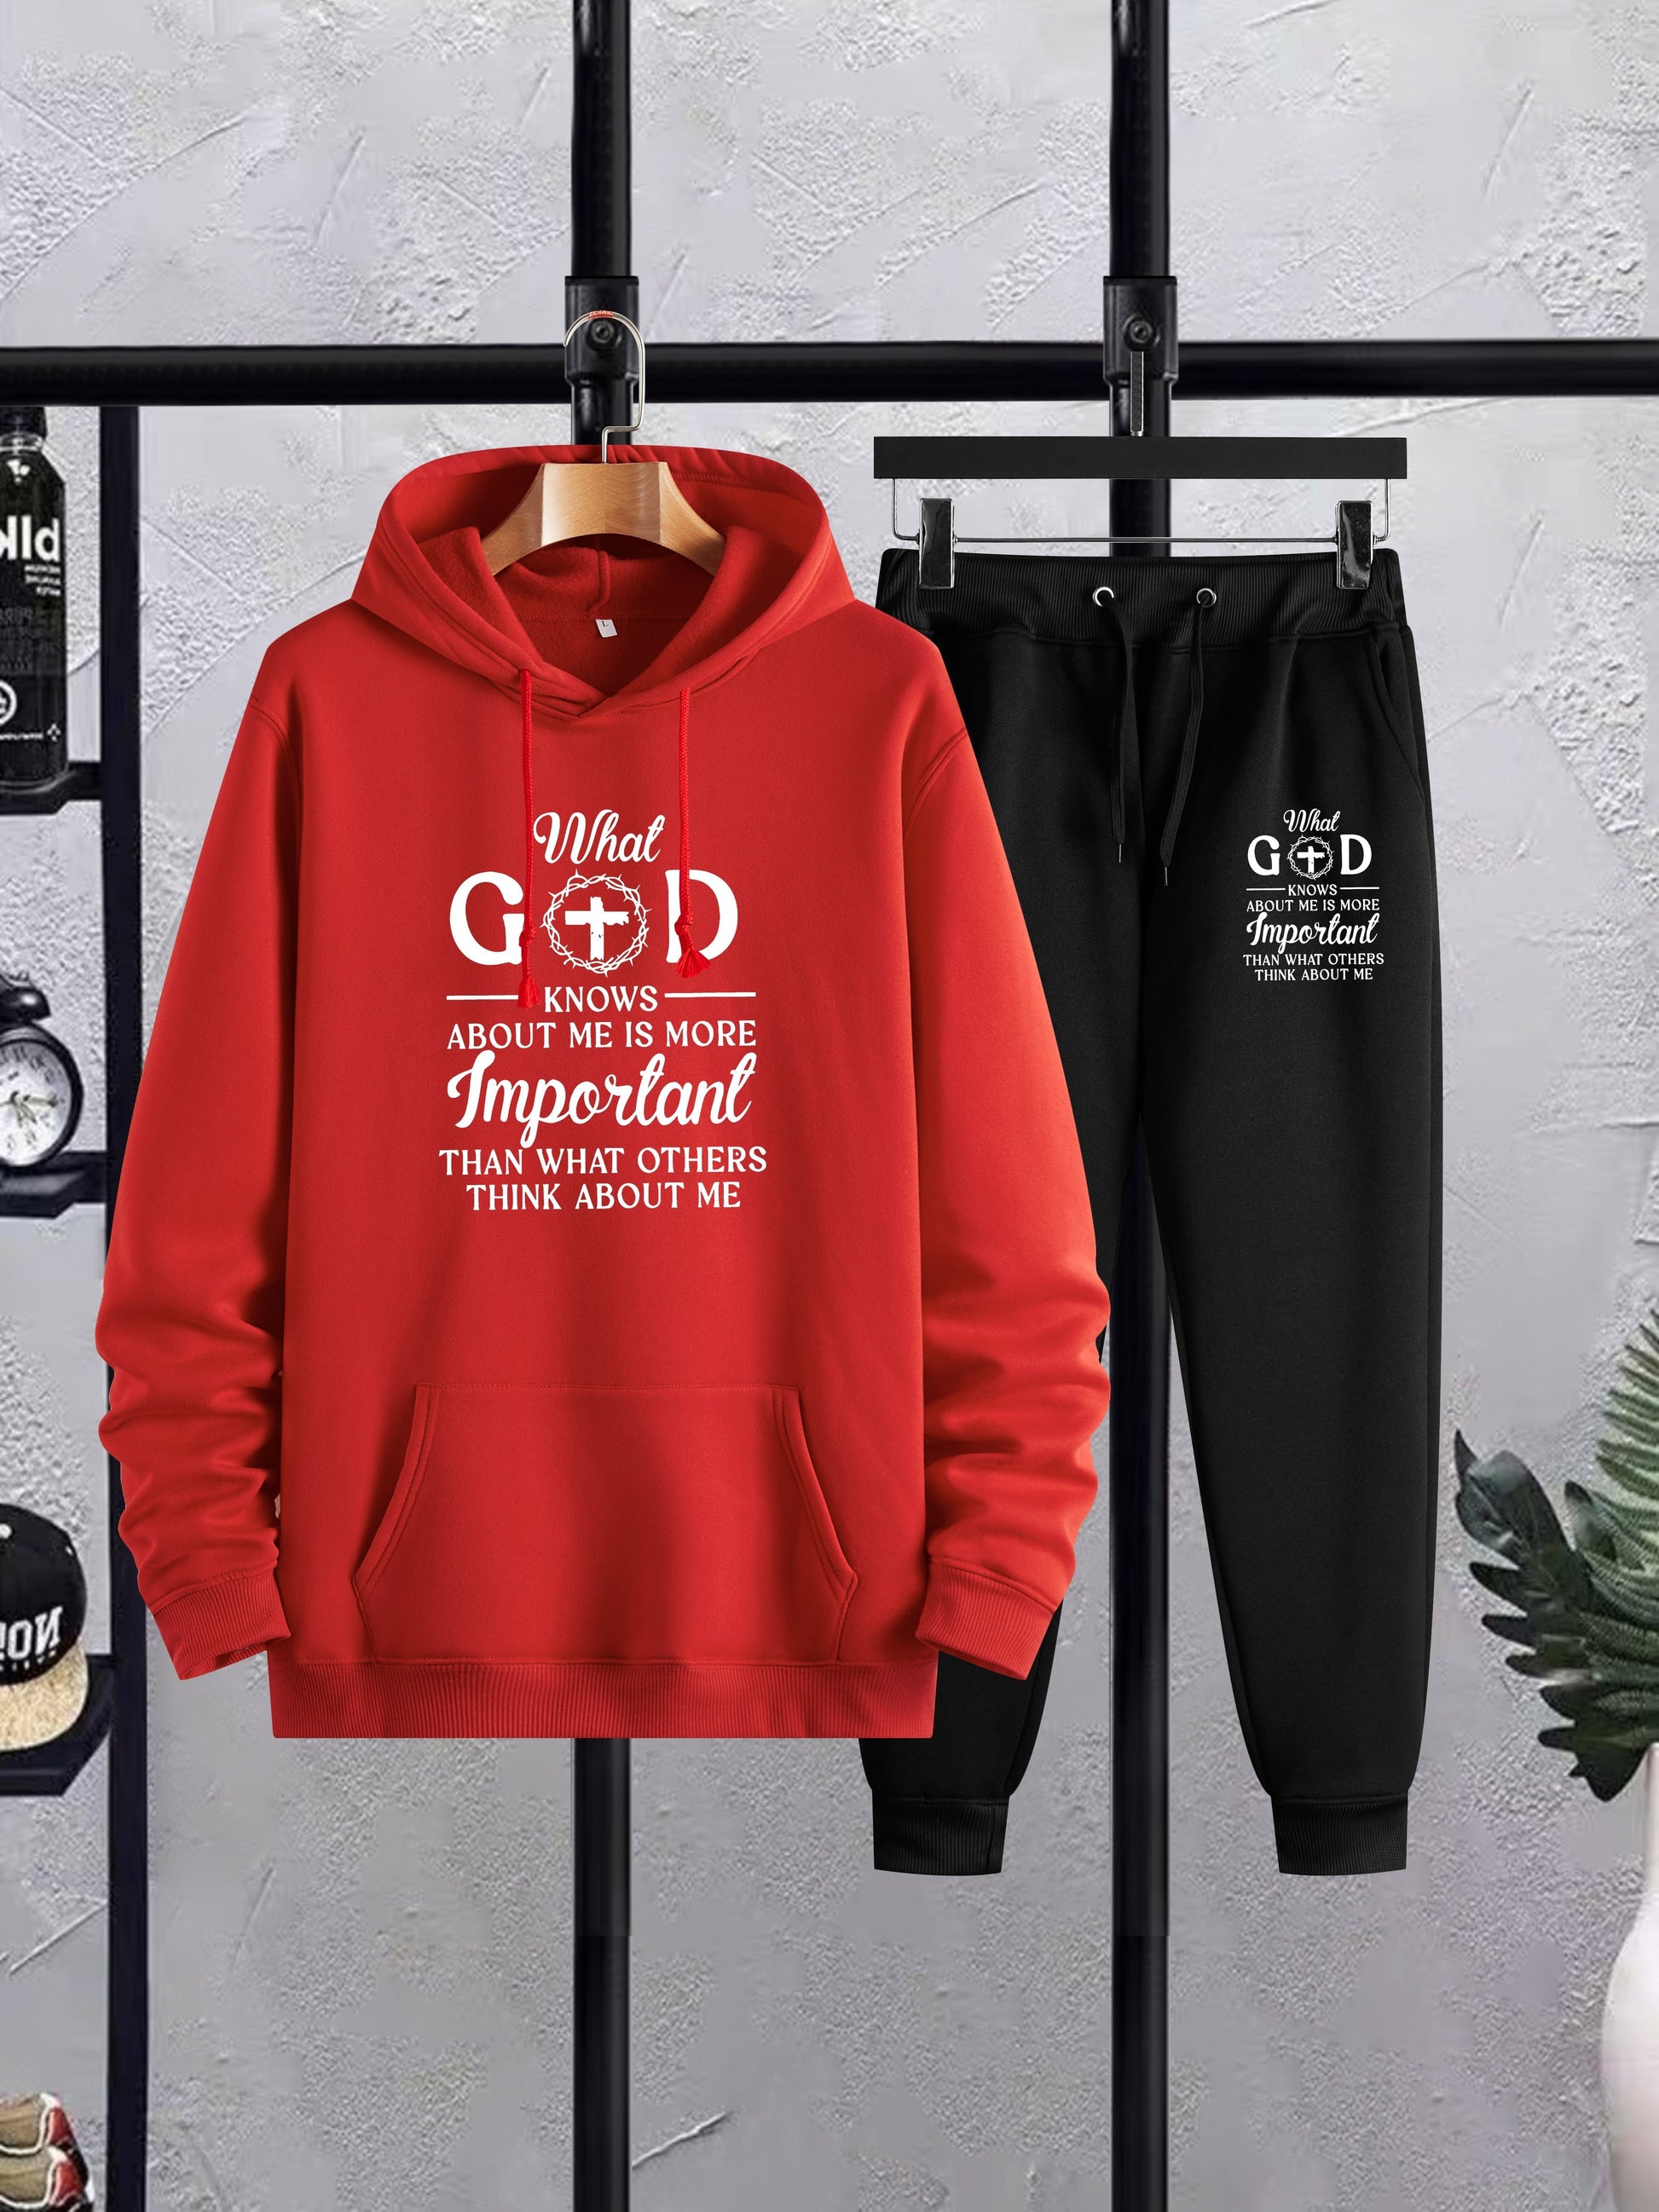 What God Knows About Me Is More Important Than What Others Think About Me Men's Christian Casual Outfit claimedbygoddesigns